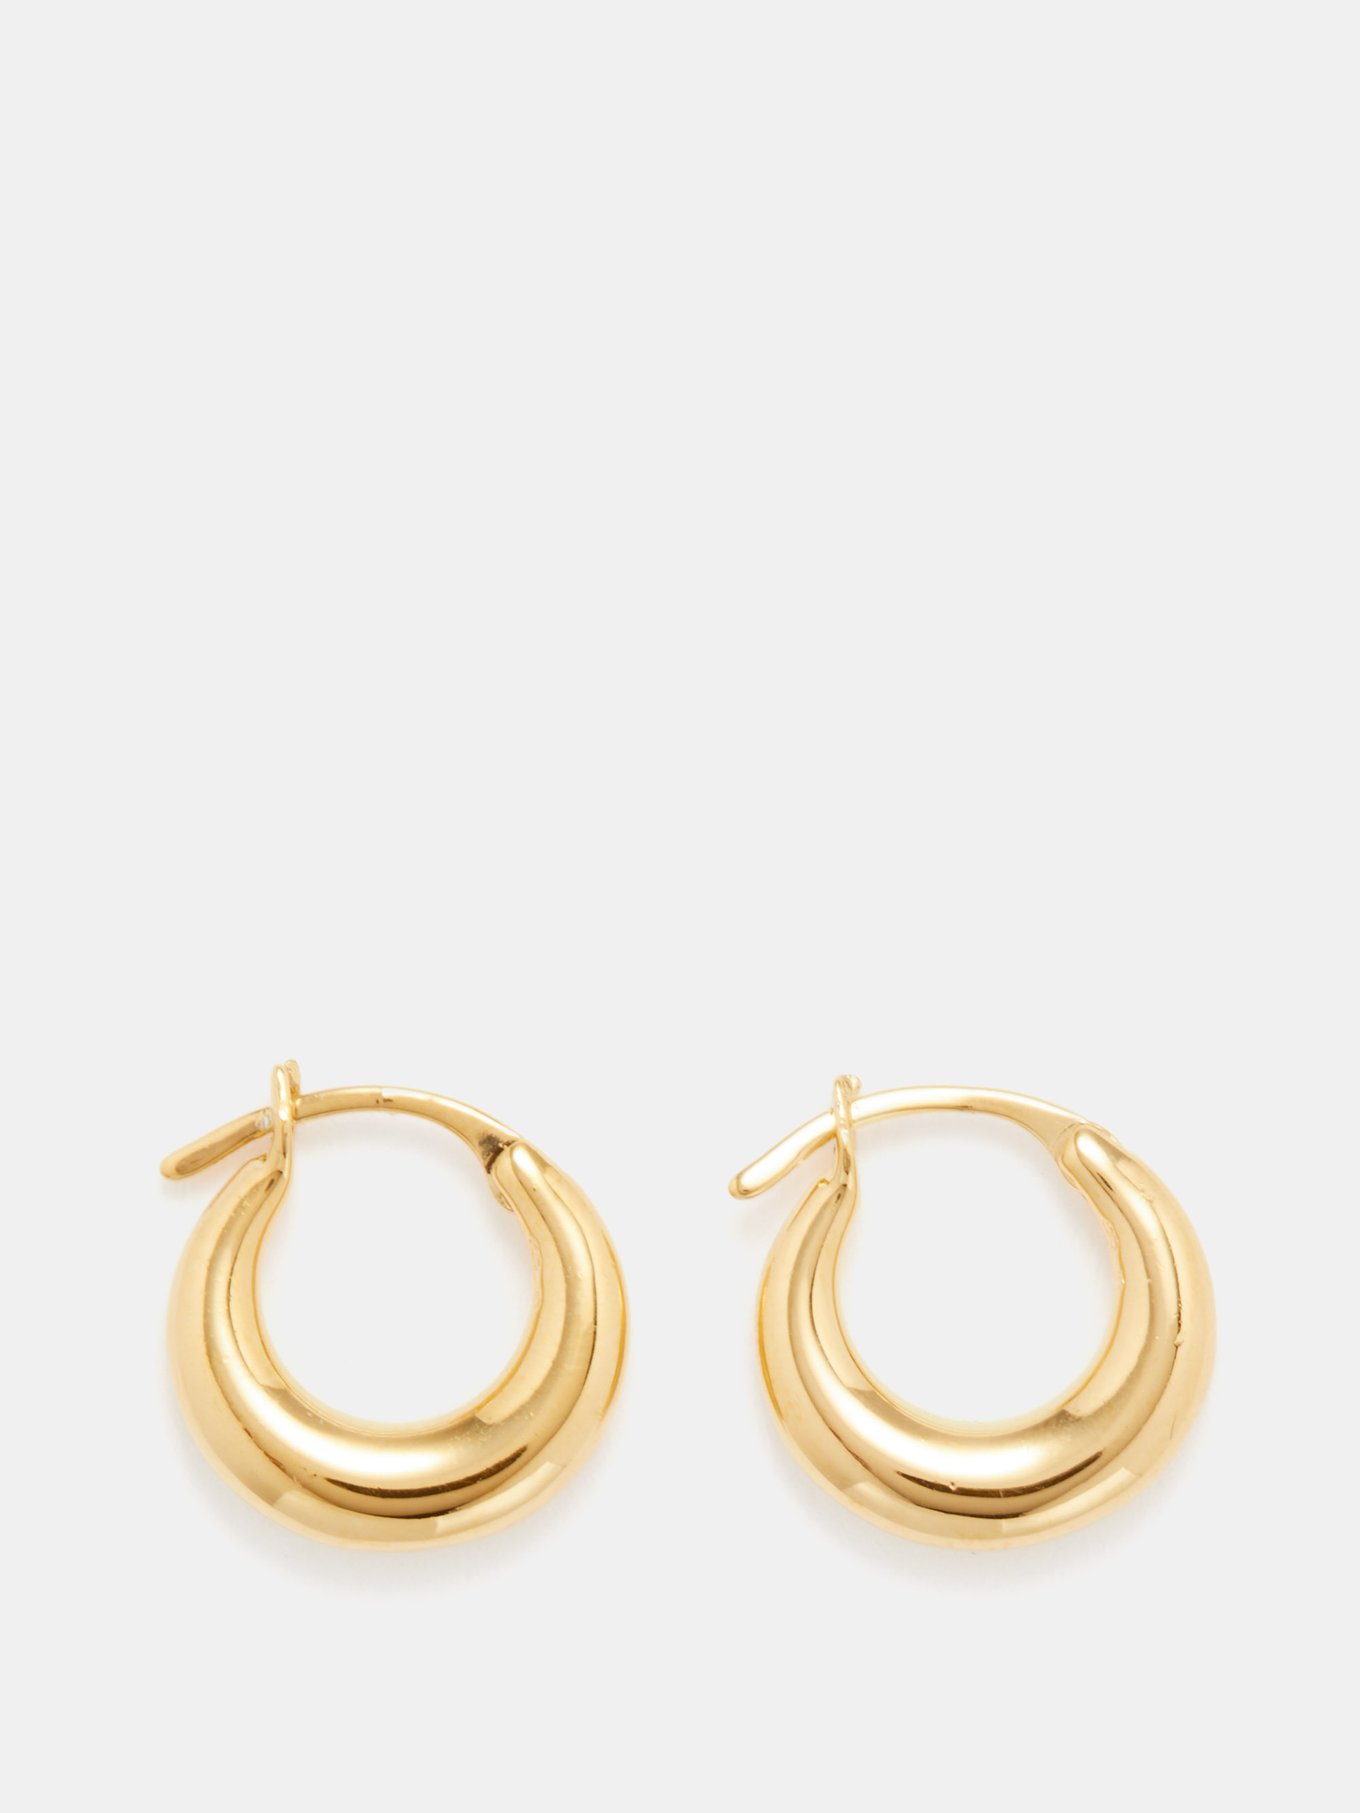 Sophie Buhai Women's Small Everyday Hoops